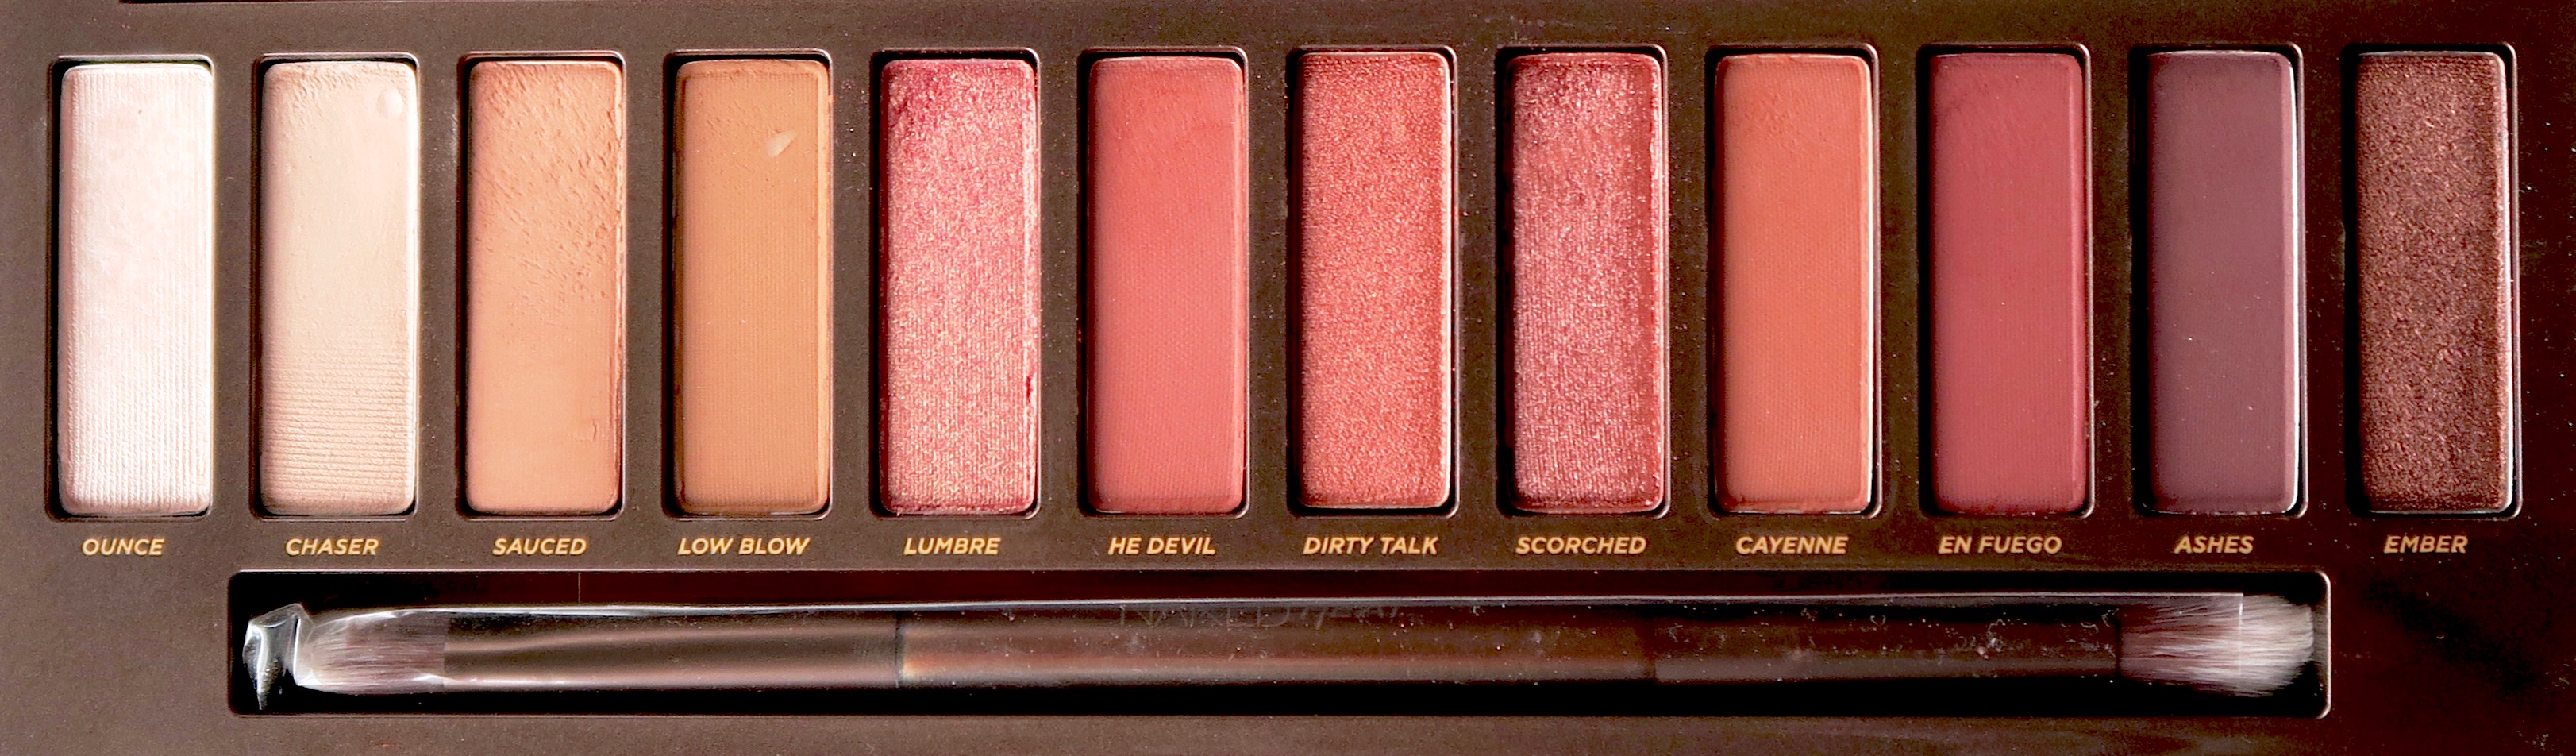 Urban Decay Naked Heat palette review: three looks, one palette